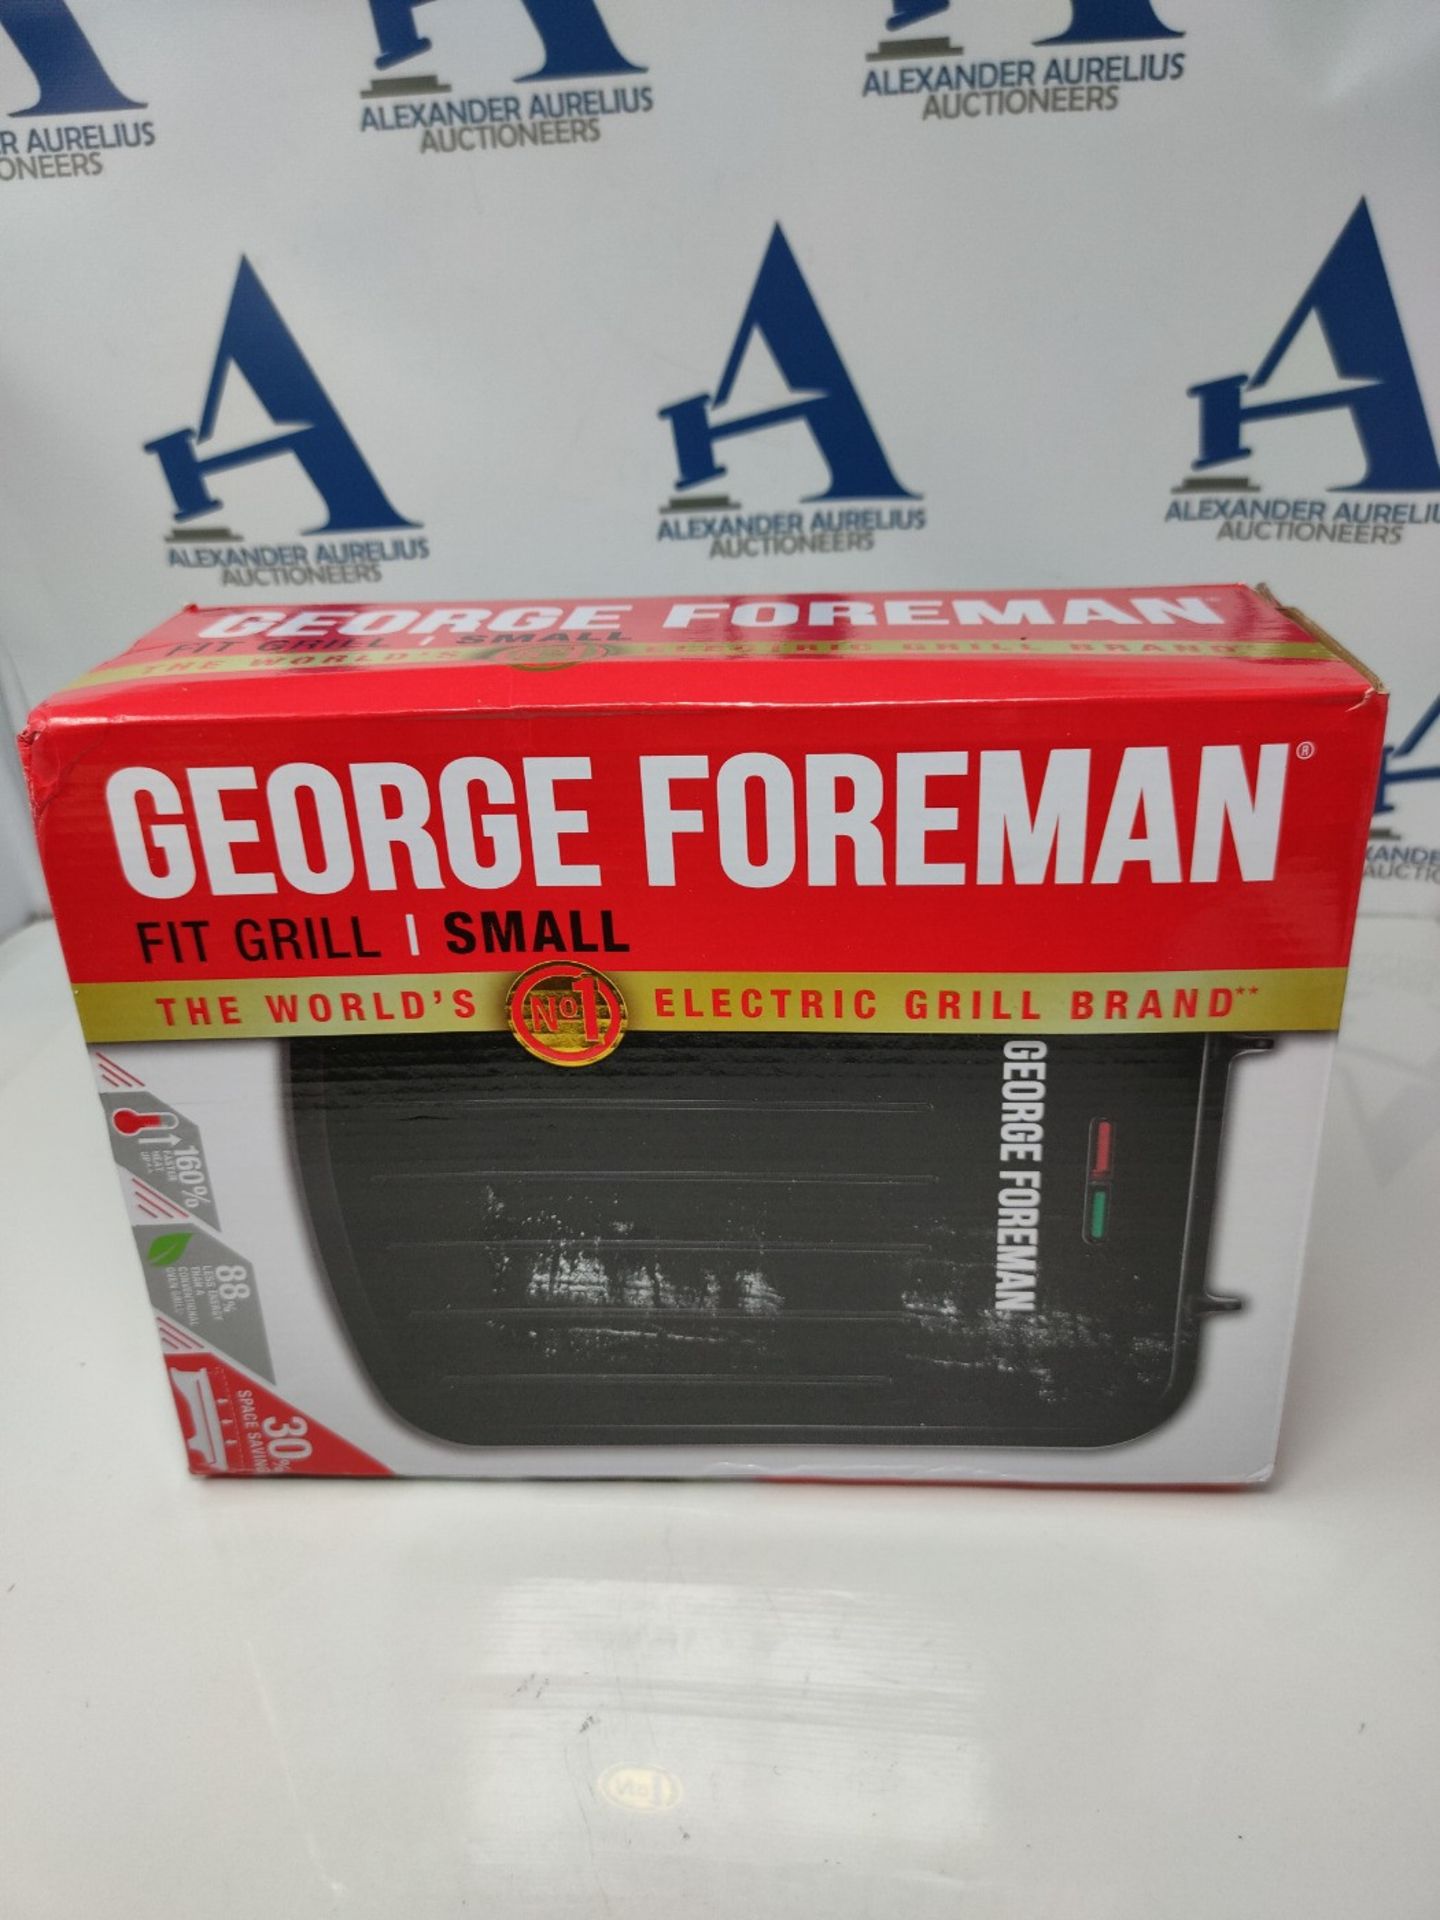 George Foreman 25800 Small Fit Grill - Versatile Griddle, Hot Plate and Toastie Machin